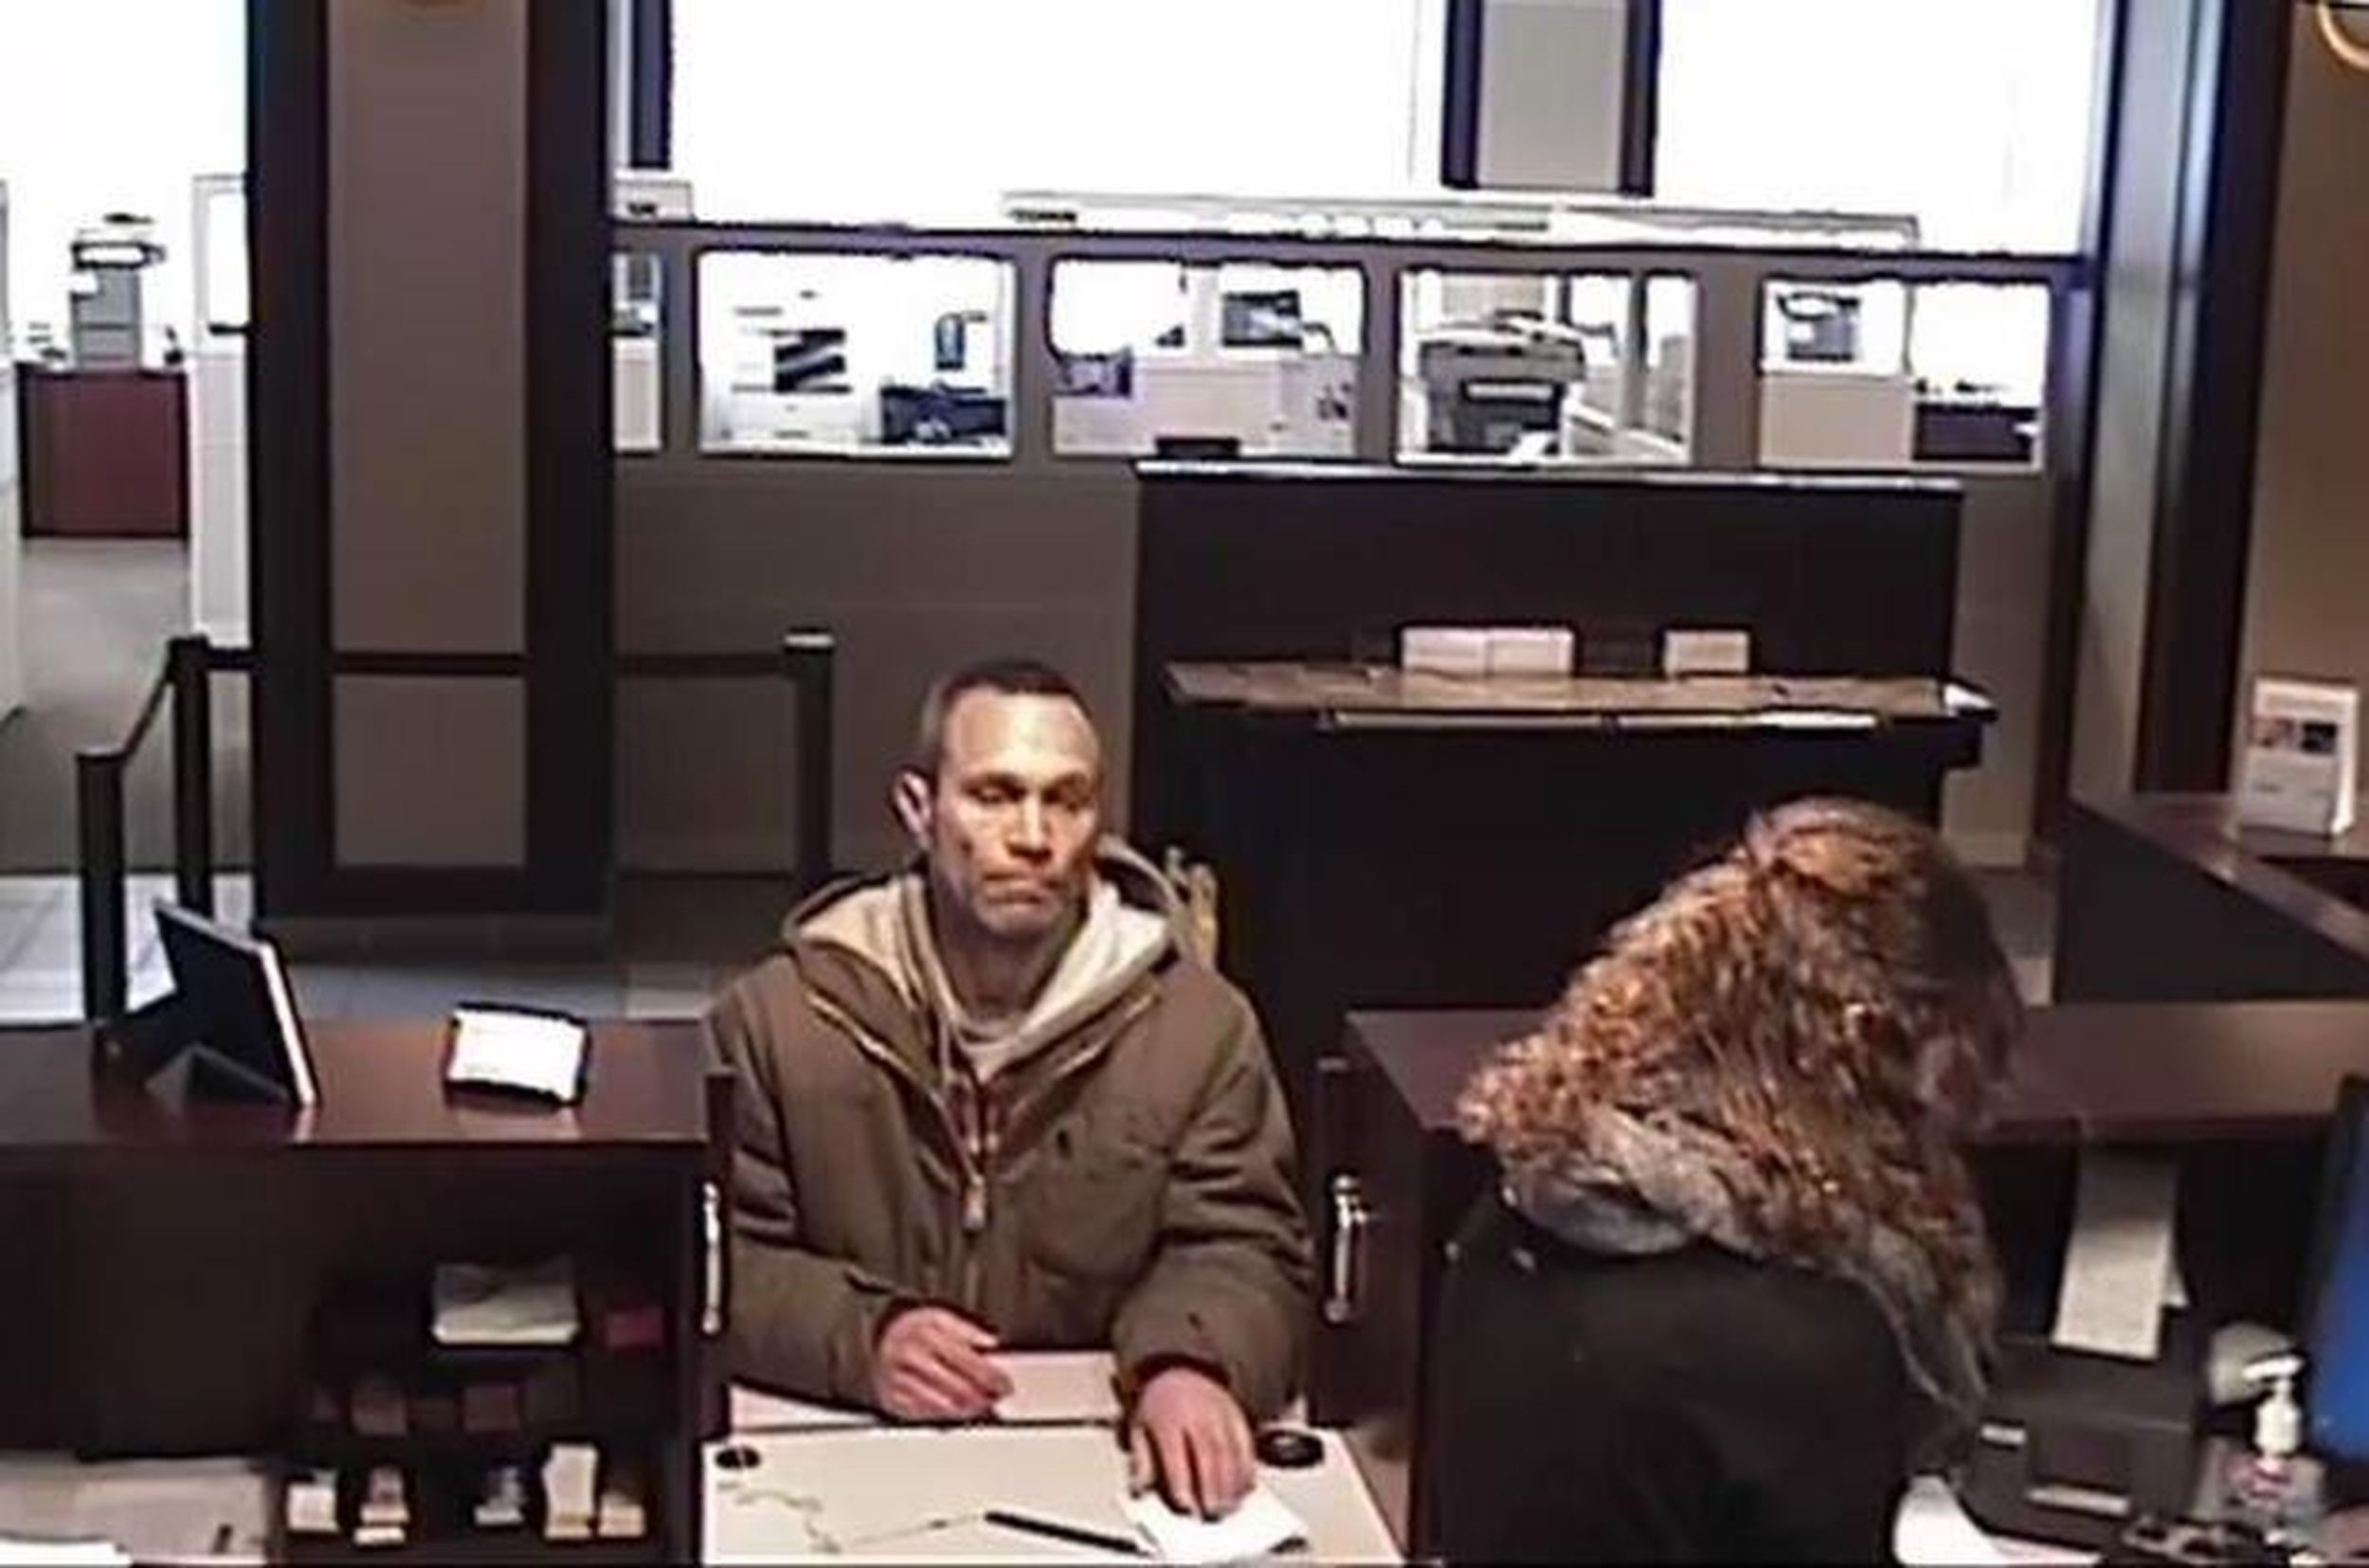 Suspect Wanted After Downtown Bank Robbery The Spokesman Review 6047